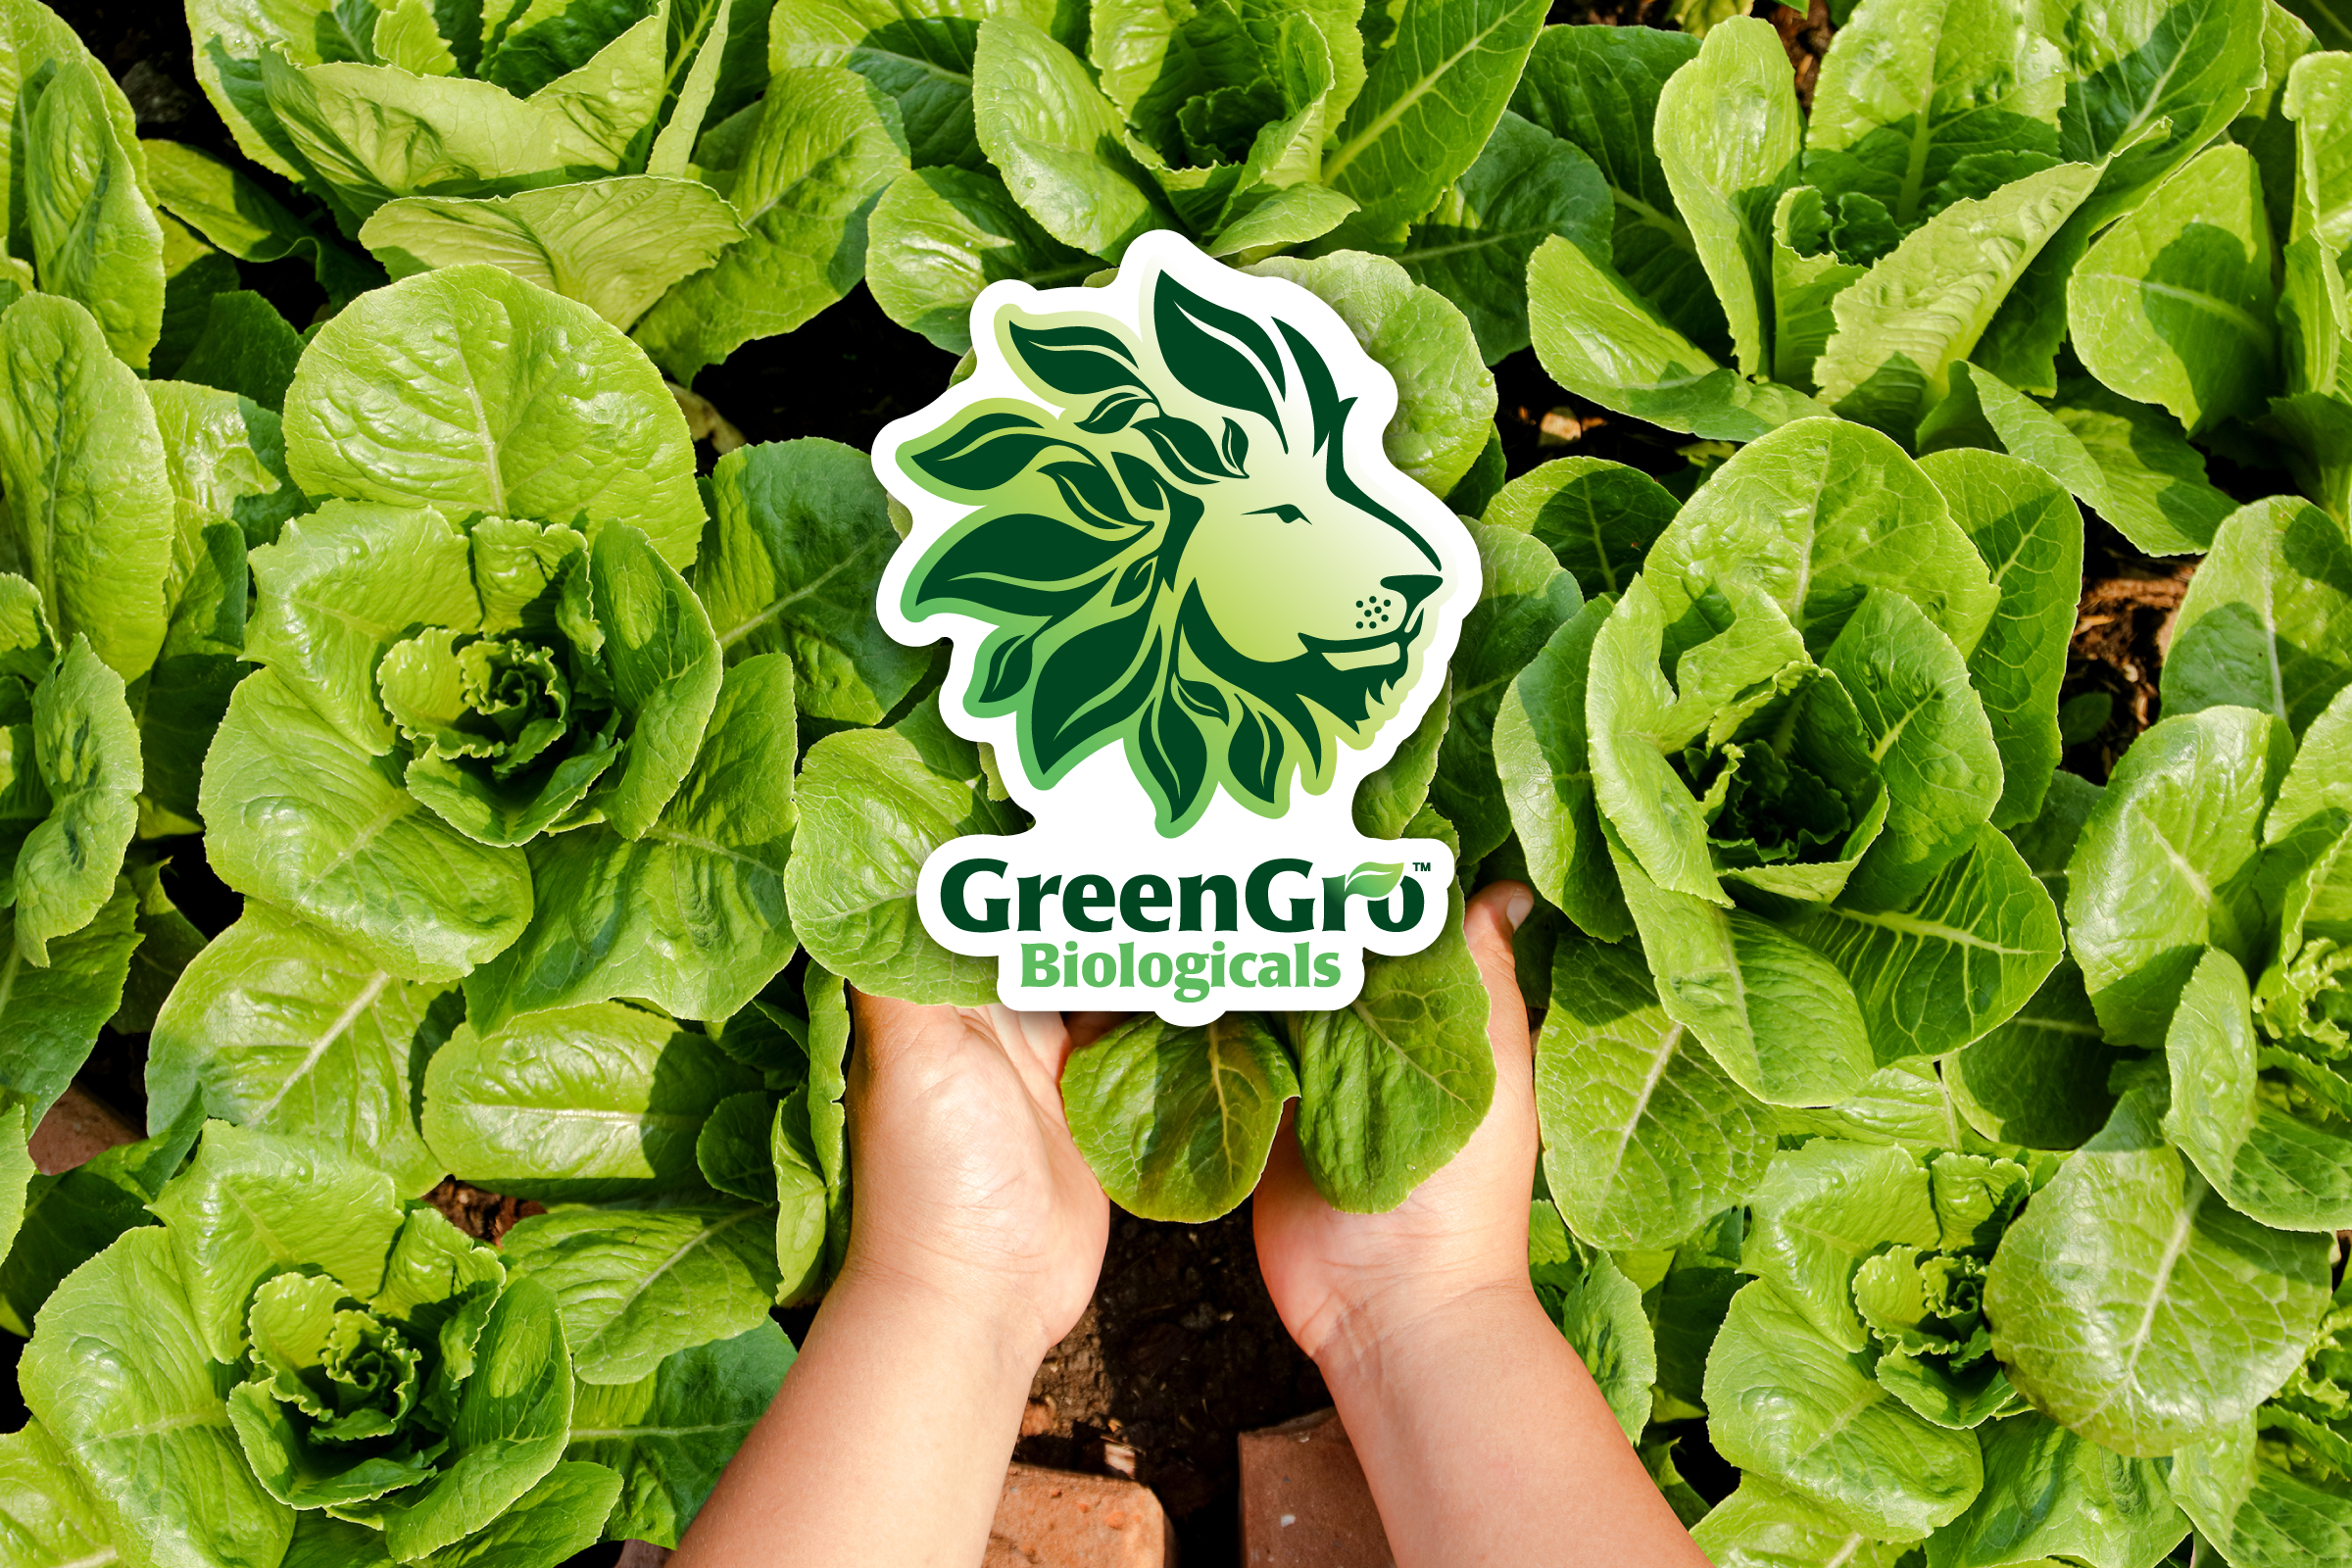 Green Gro Logo overlayed on Woman holding Lettuce head in garden bed